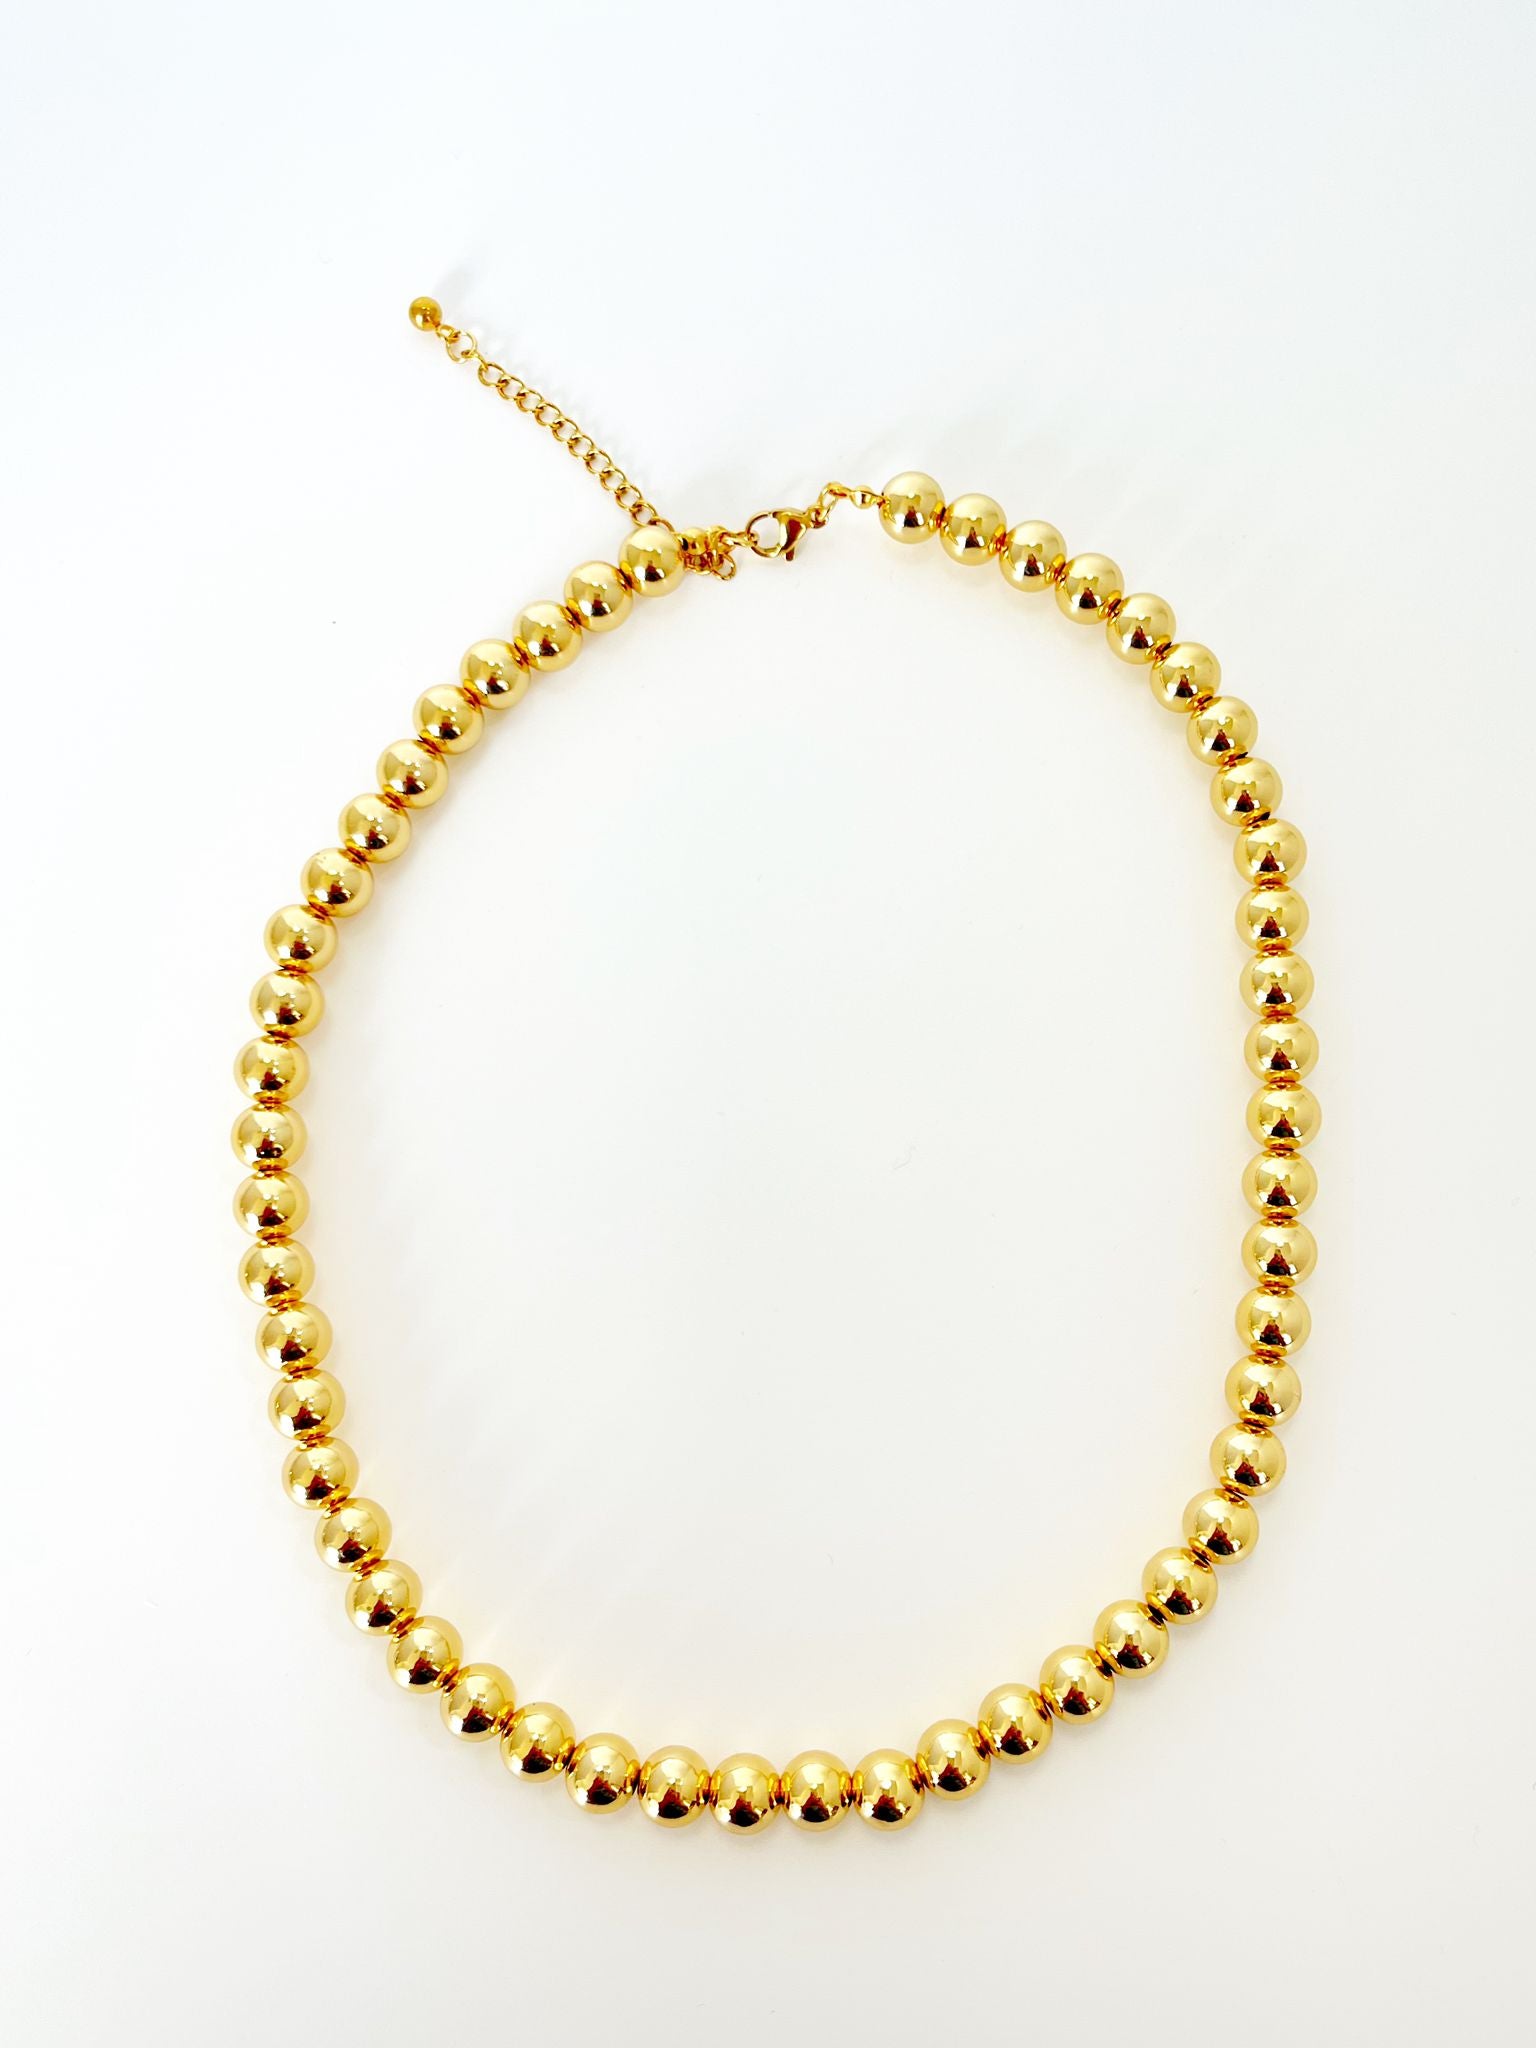 Small gold necklace